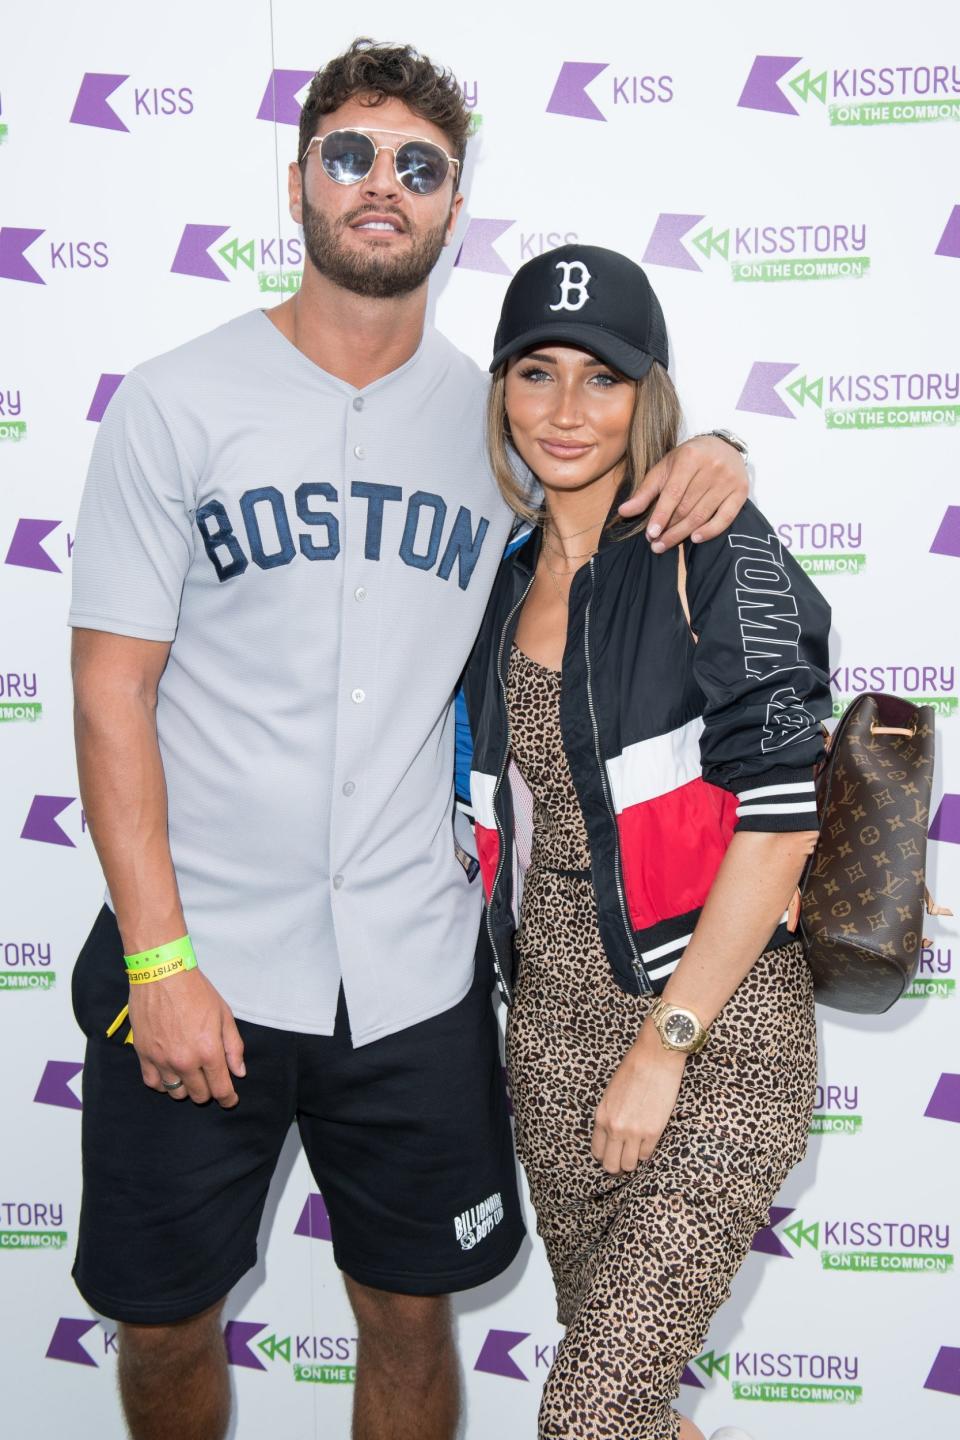 Emotional: Mike Thalassitis and Megan McKenna at Kisstory On The Common 2018 in July last year (Getty Images)